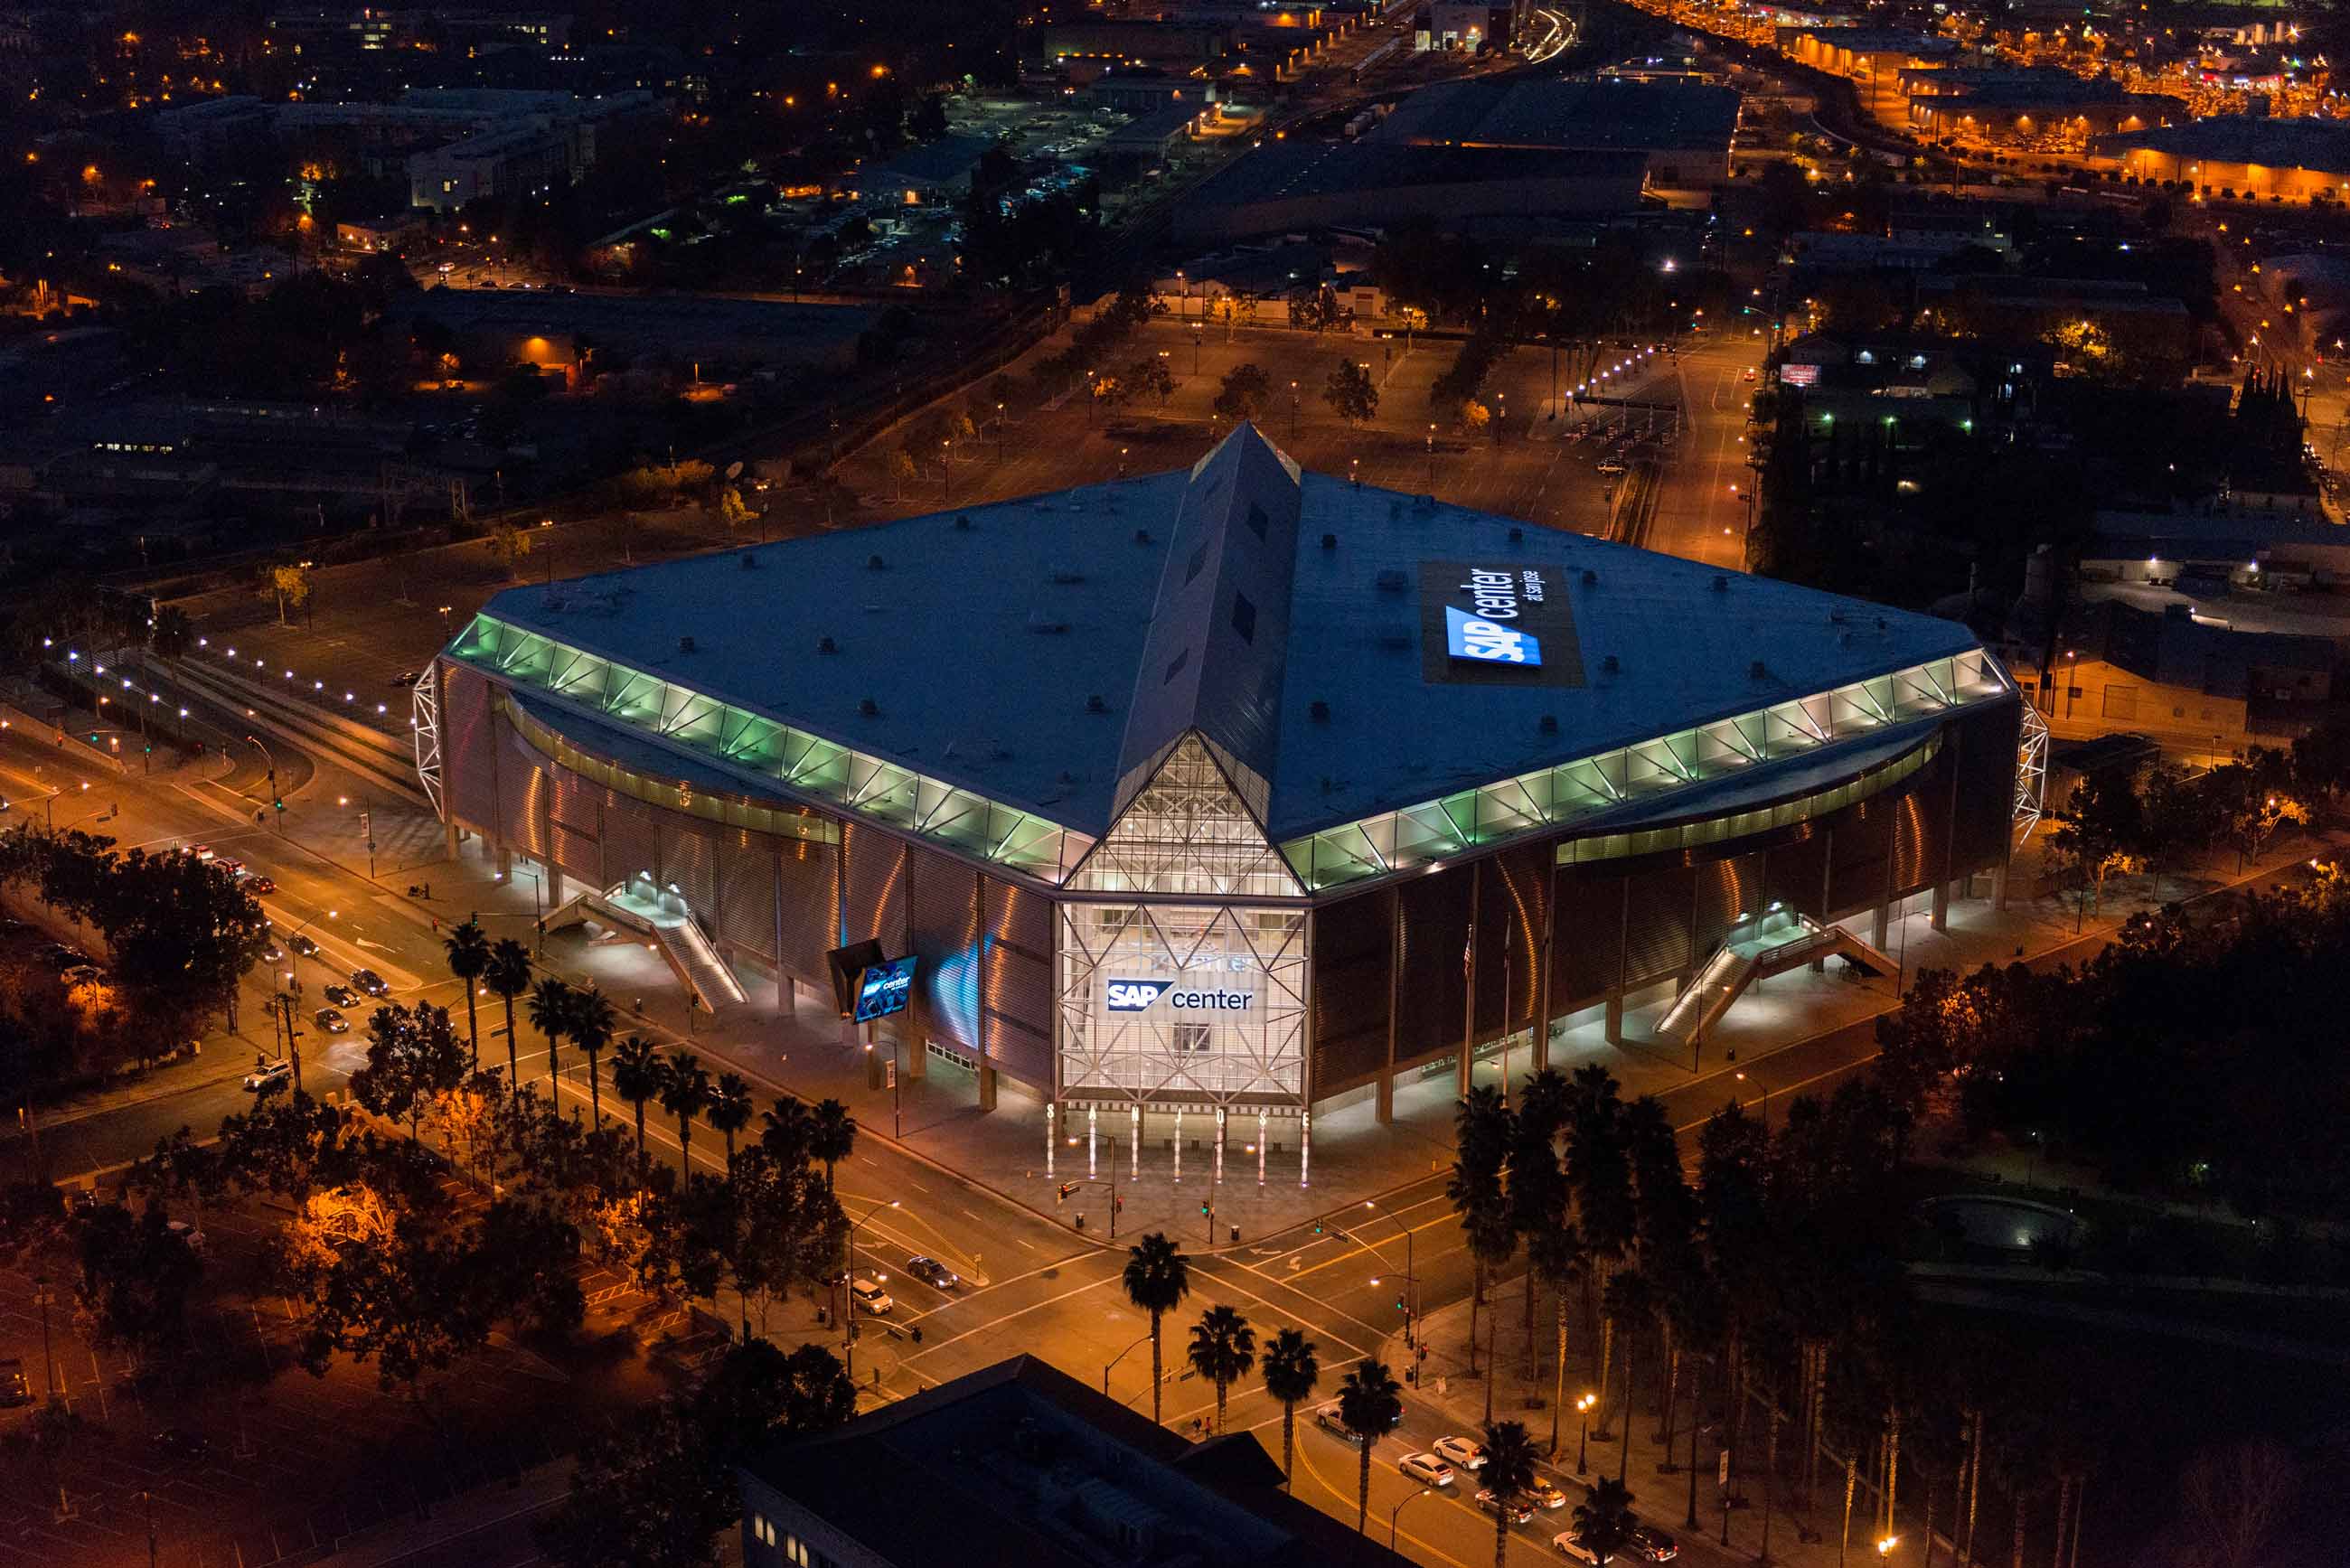 An aerial view of the SAP center at night